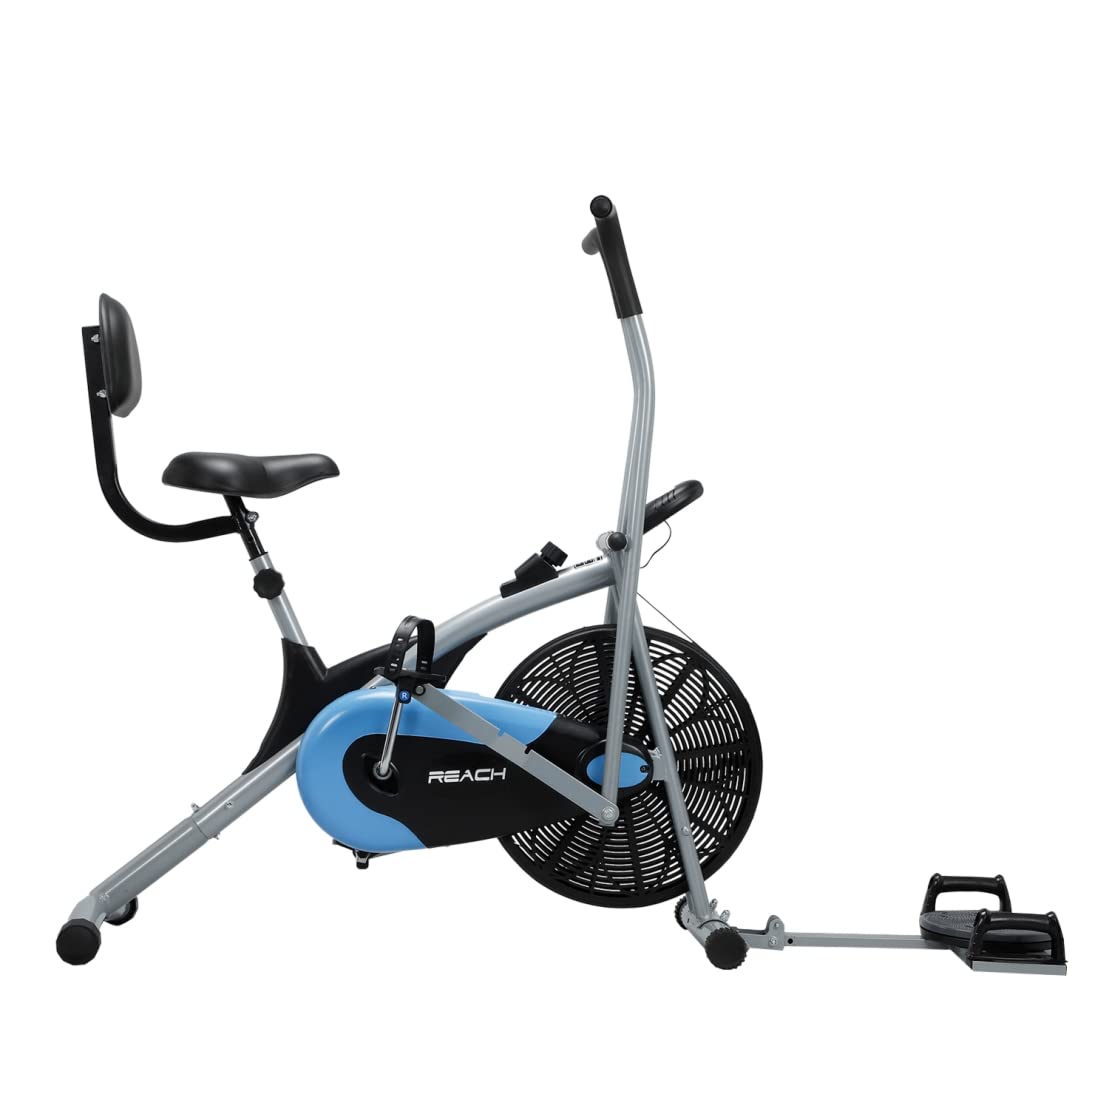 Reach AB-110 BPT Air Bike Exercise Cycle for Home Gym  with Push Up Bar  Twister  Adjustable Resistance  Seat with Back Support  Fitness Machine with Moving  Stationary Handles